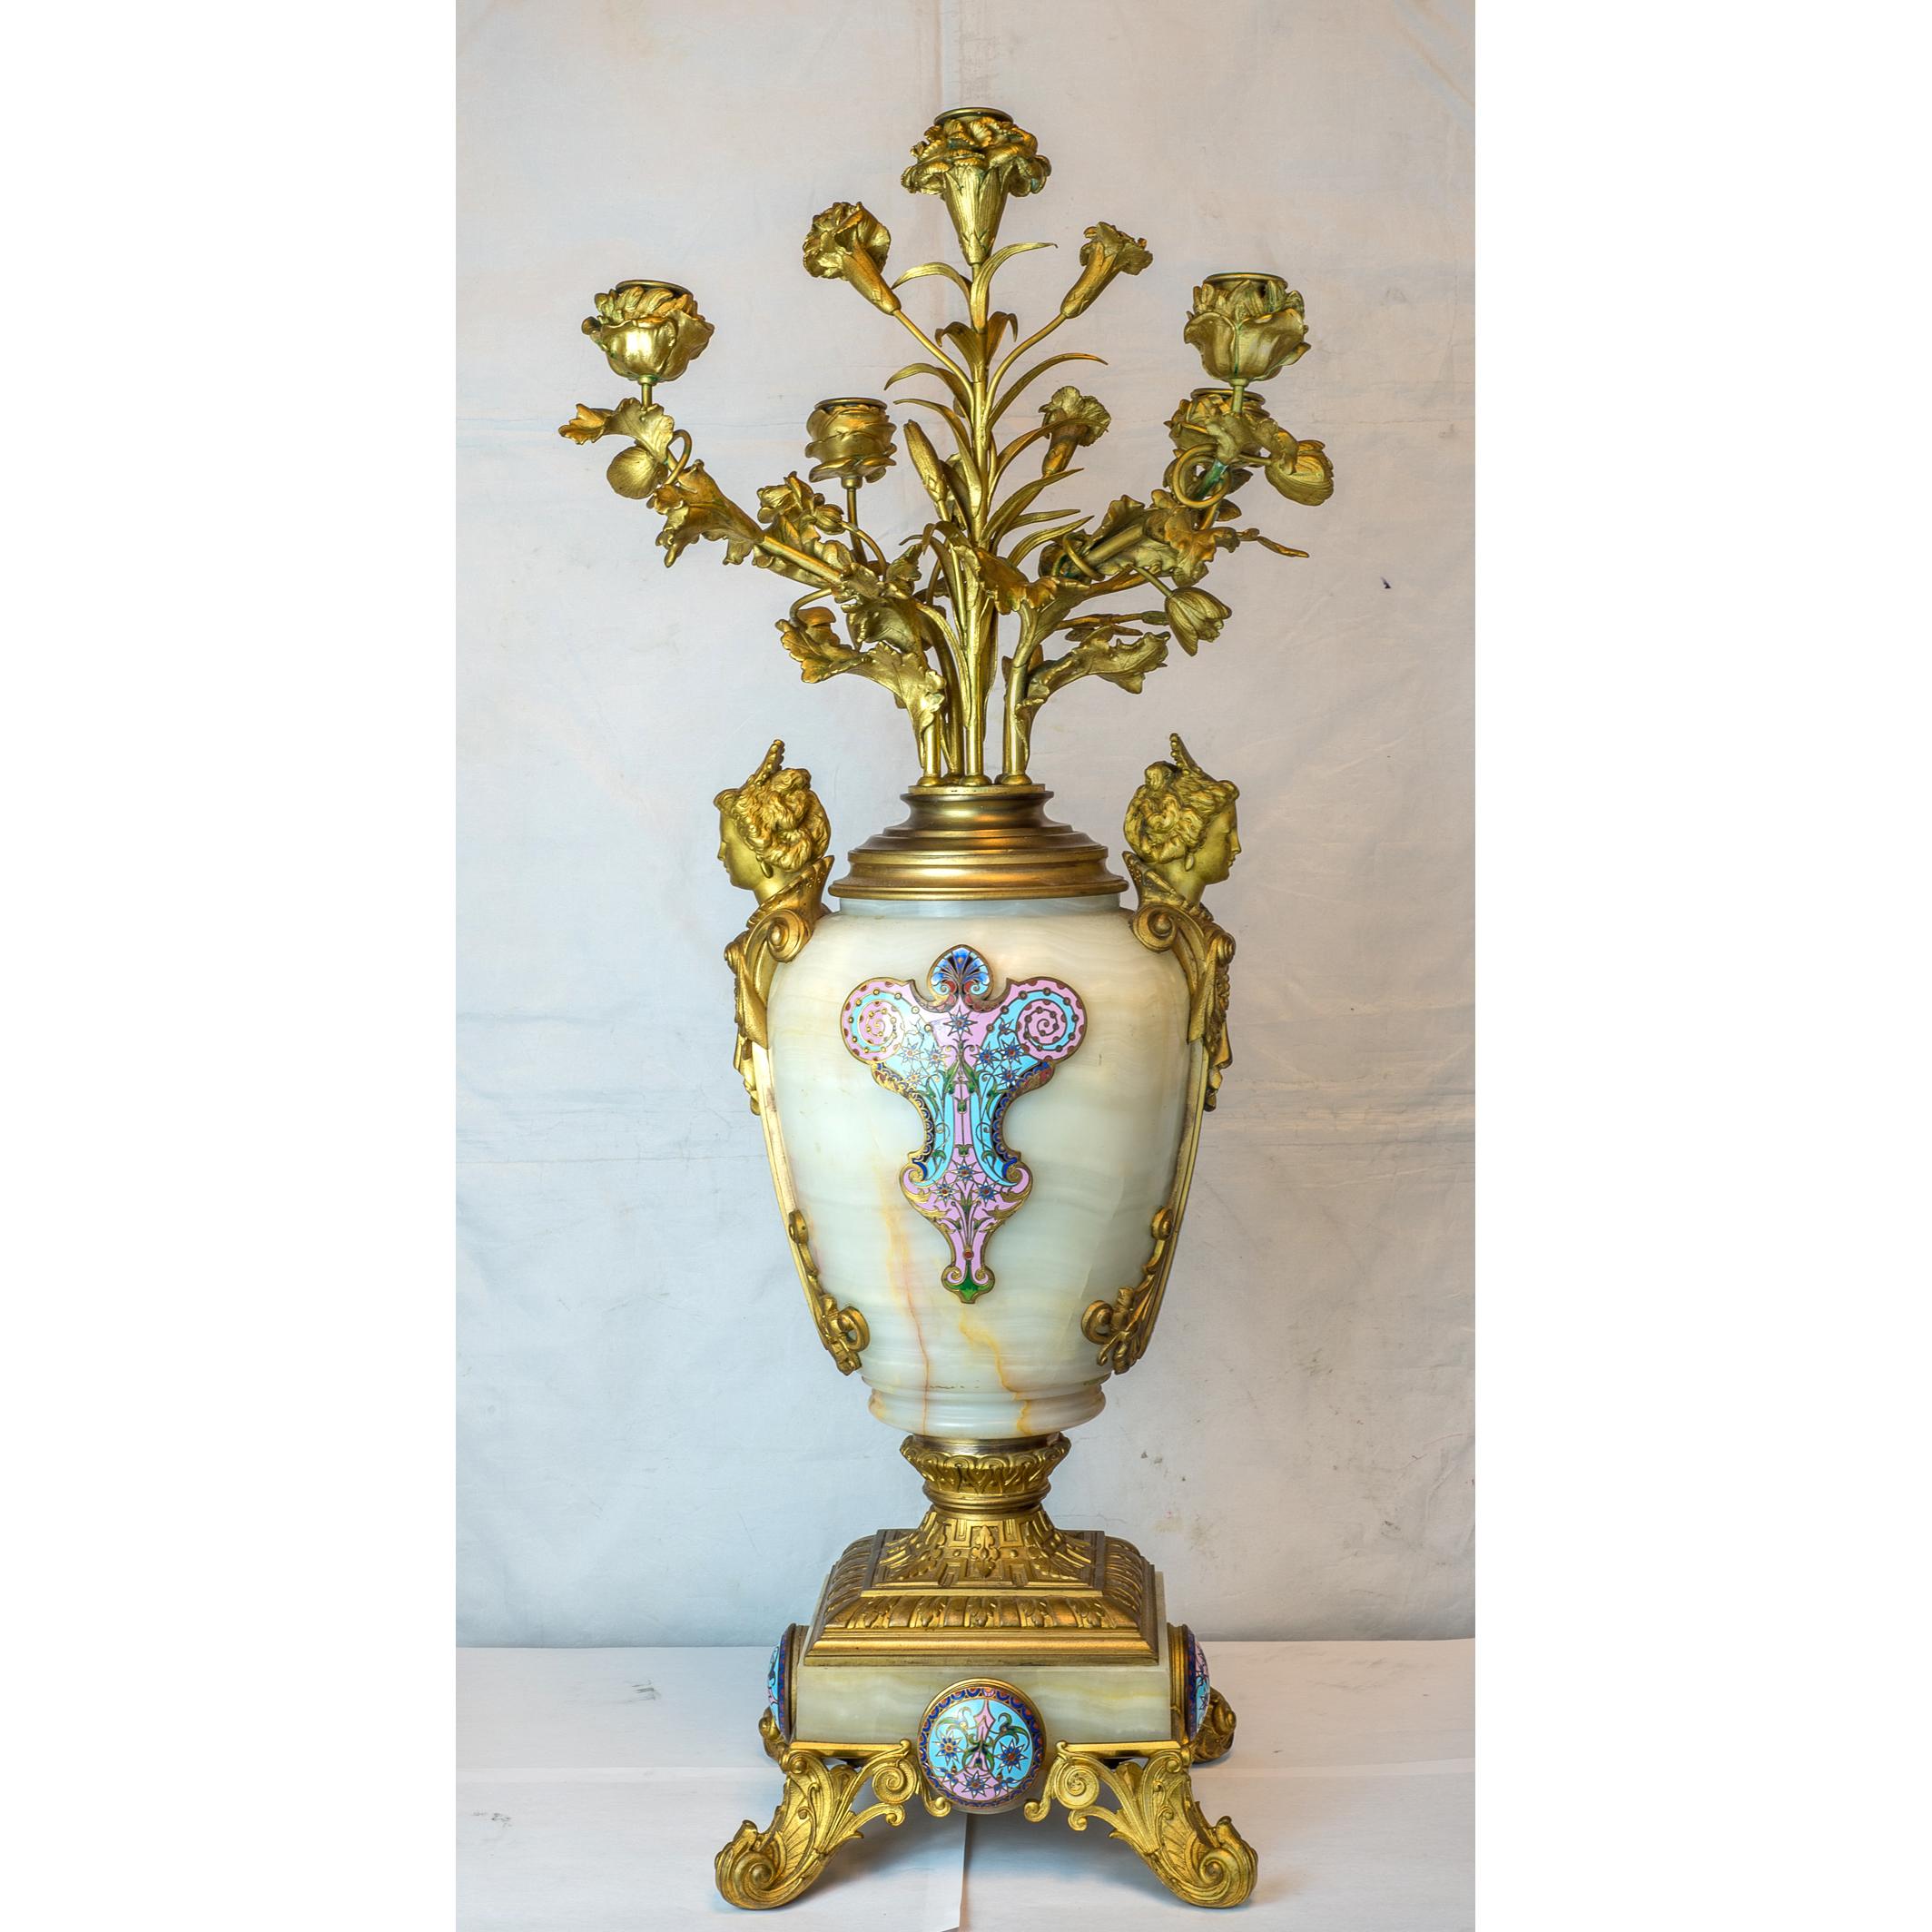 19th Century French Ormolu and Champlevé Enamel-Mounted Onyx Torchères